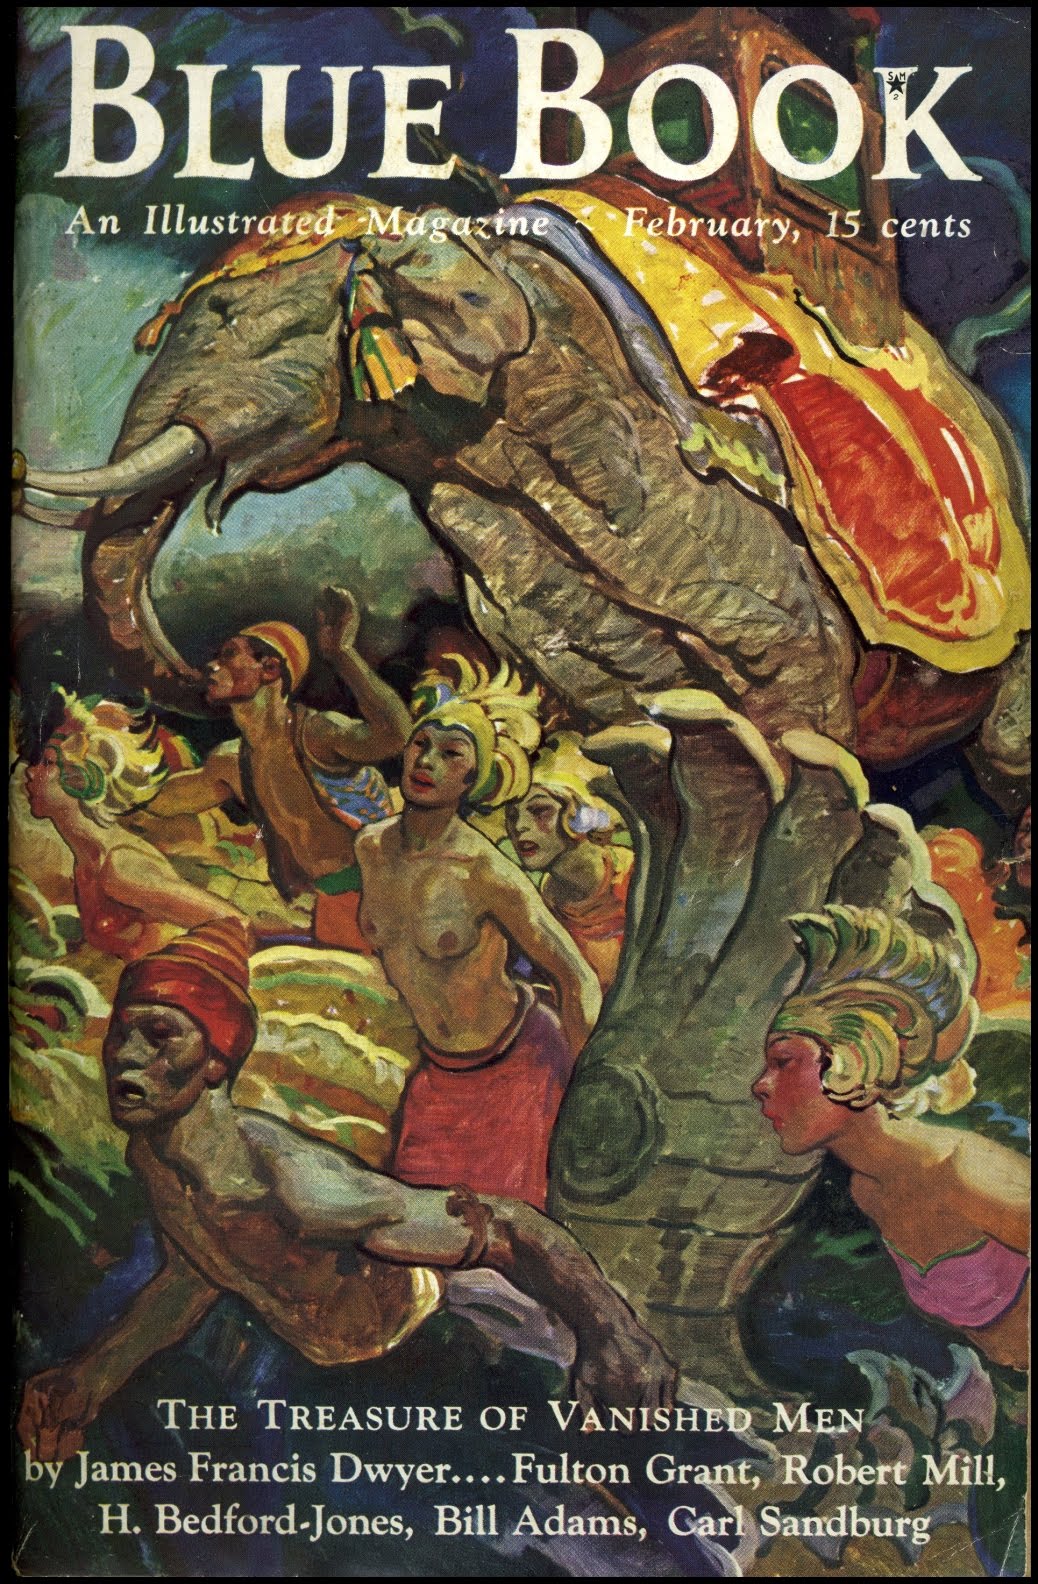 cover to blue book magazine featyring elephants and people